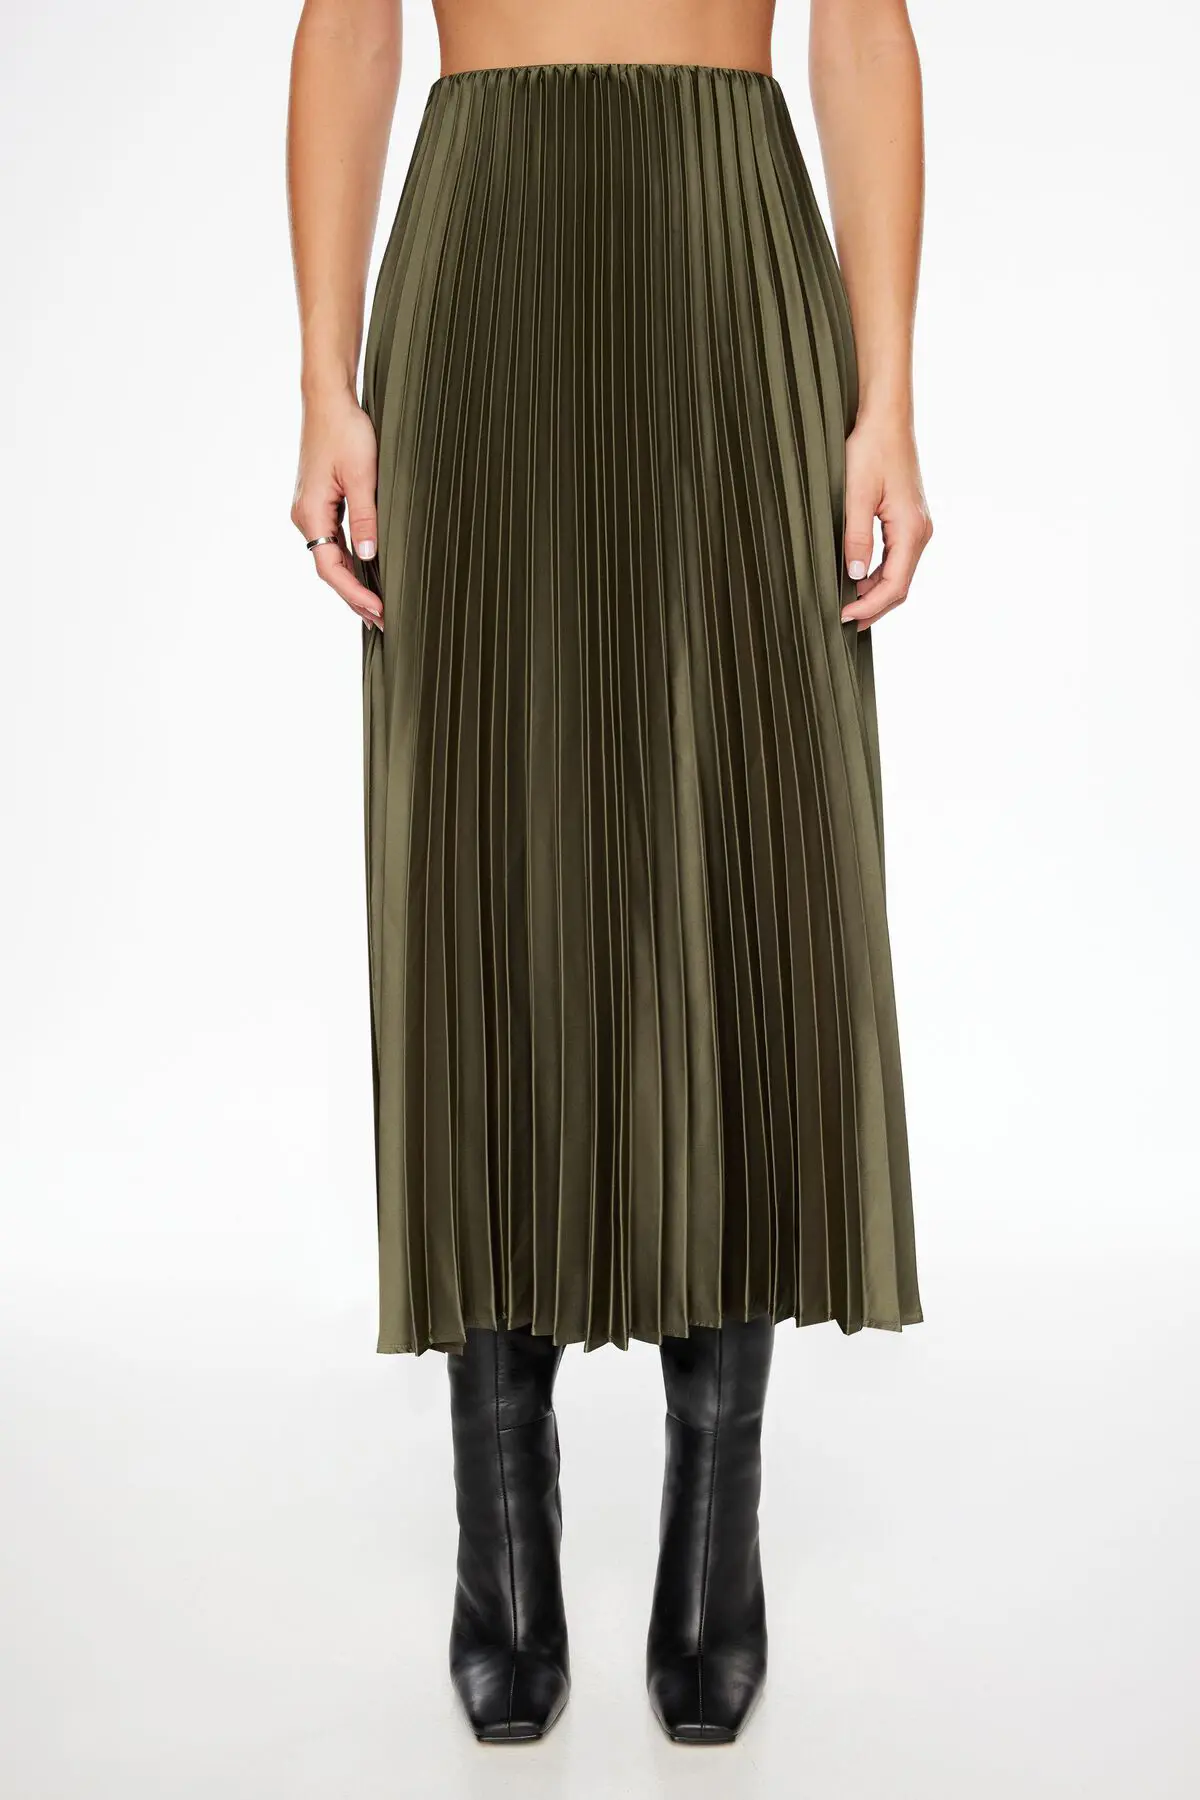 Dynamite Laure Pleated Maxi Skirt. 2